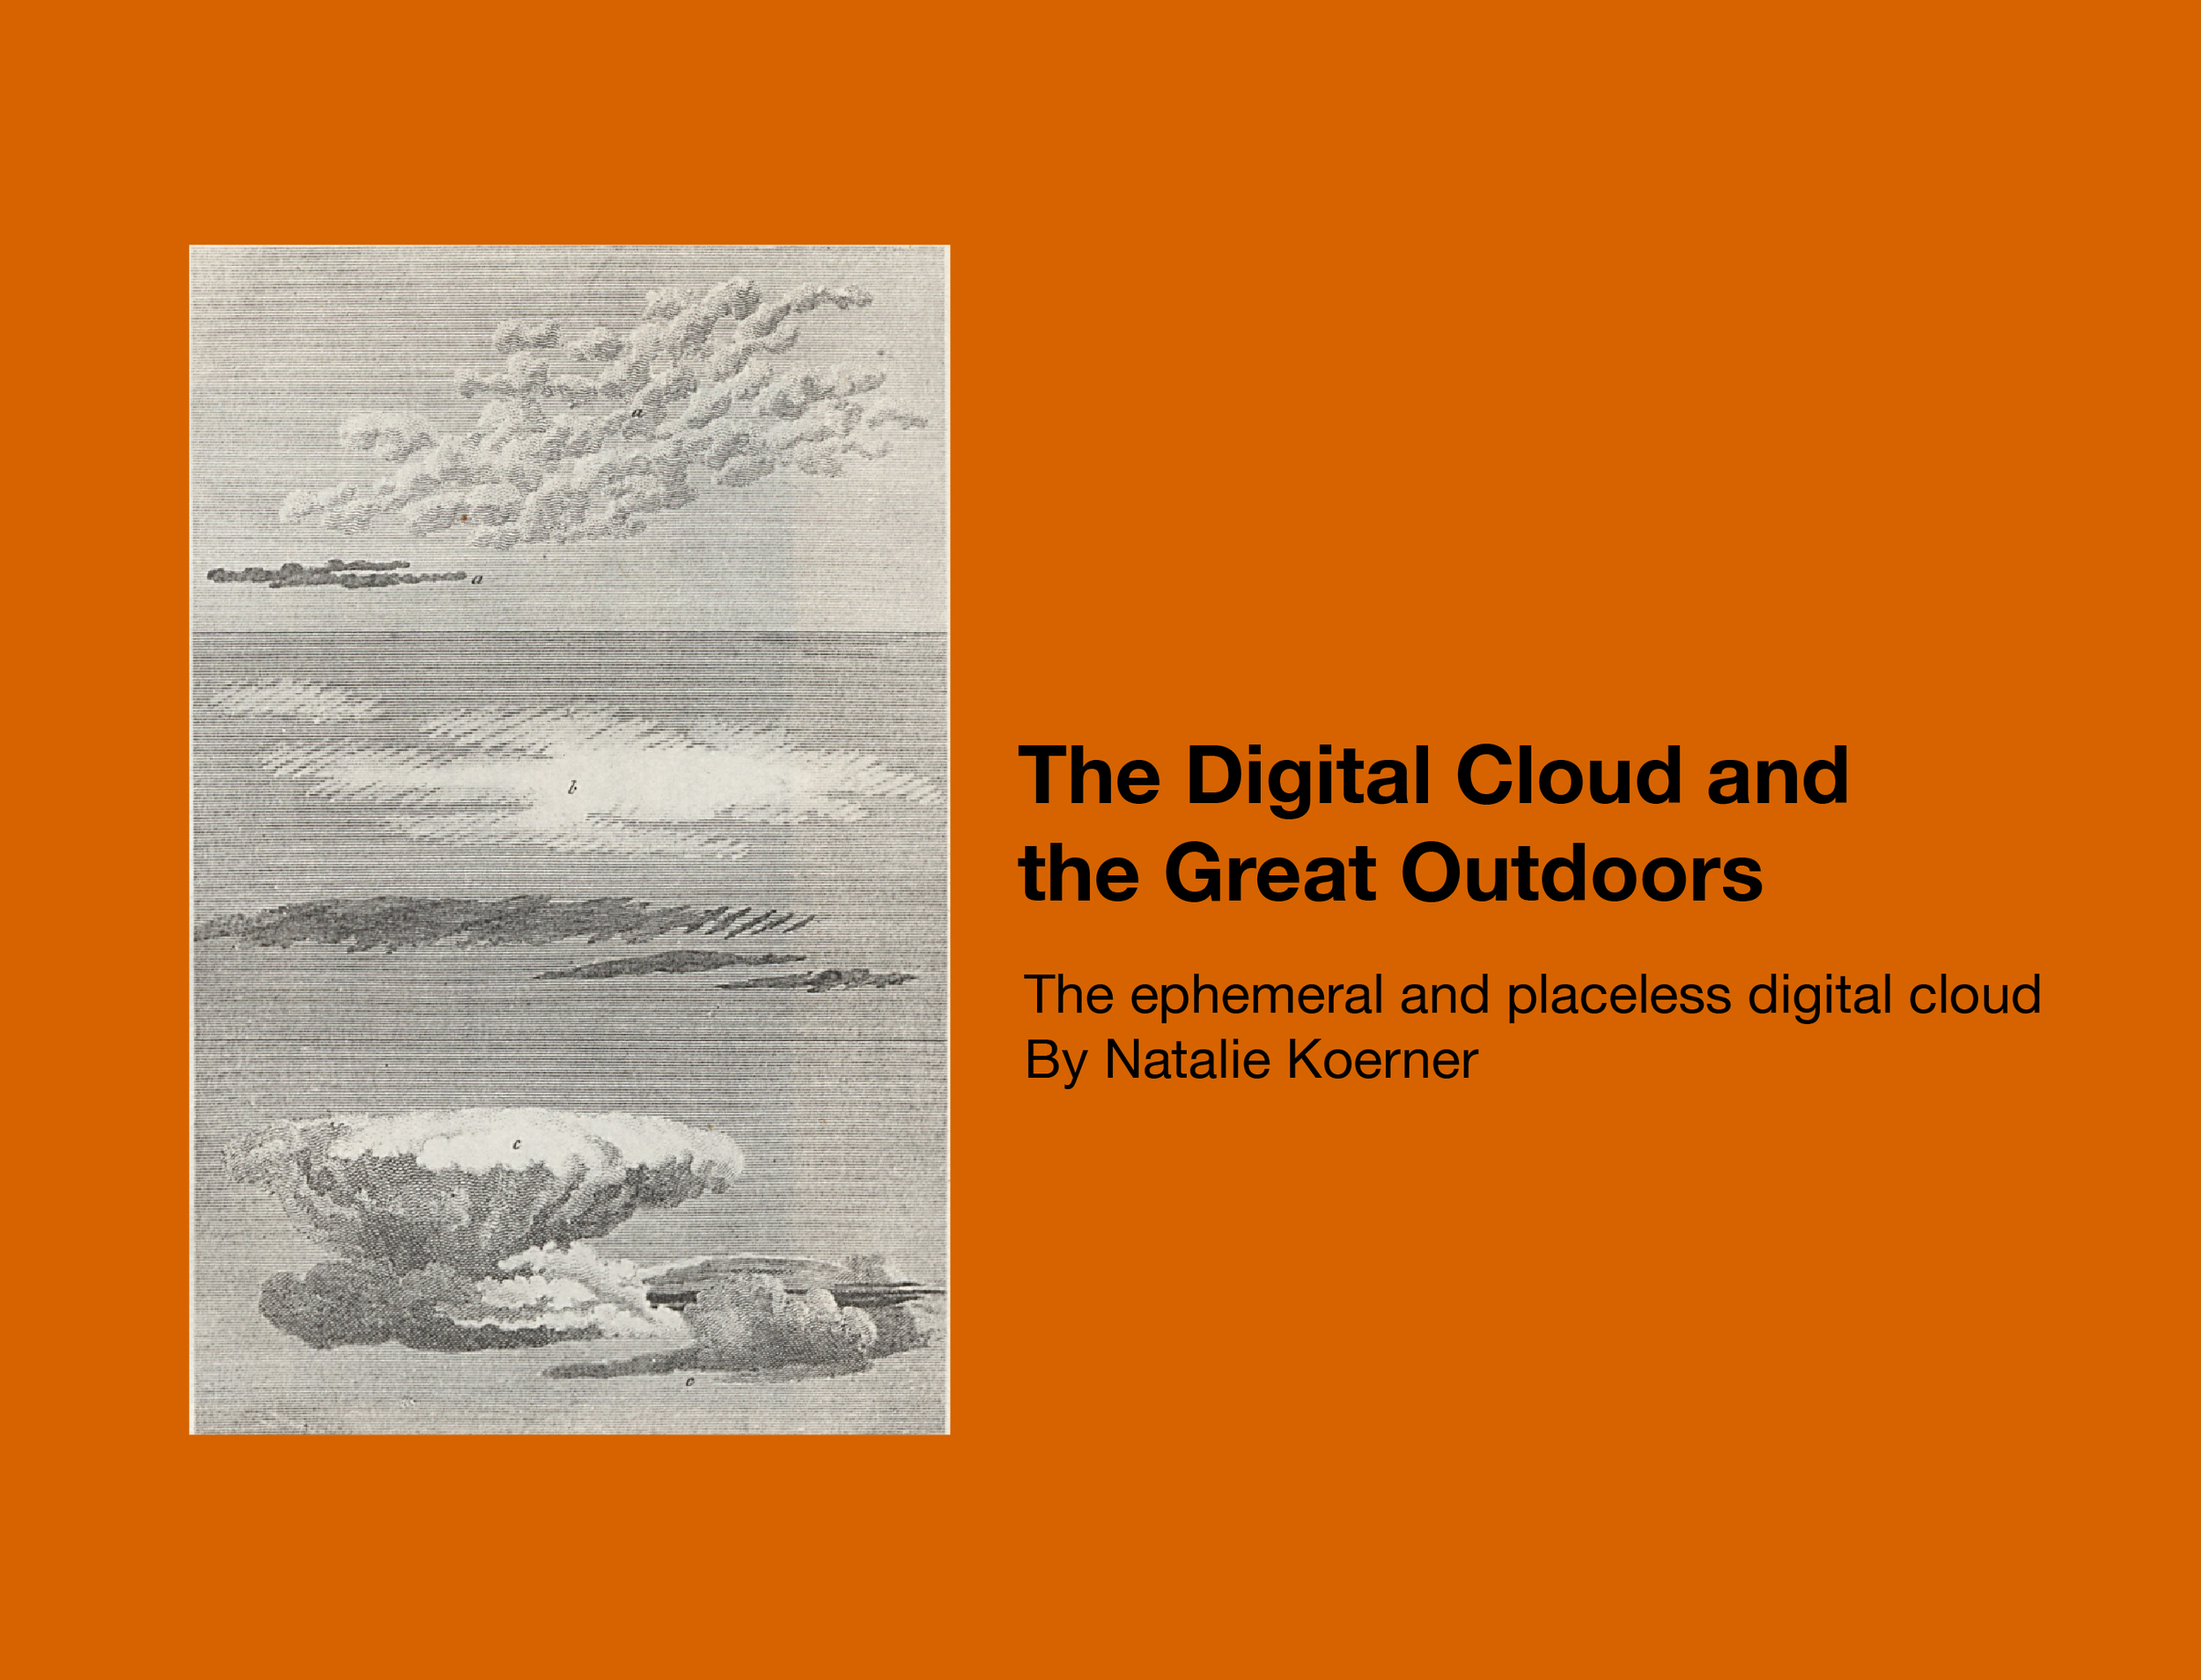 The Digital Cloud and the Great Outdoors